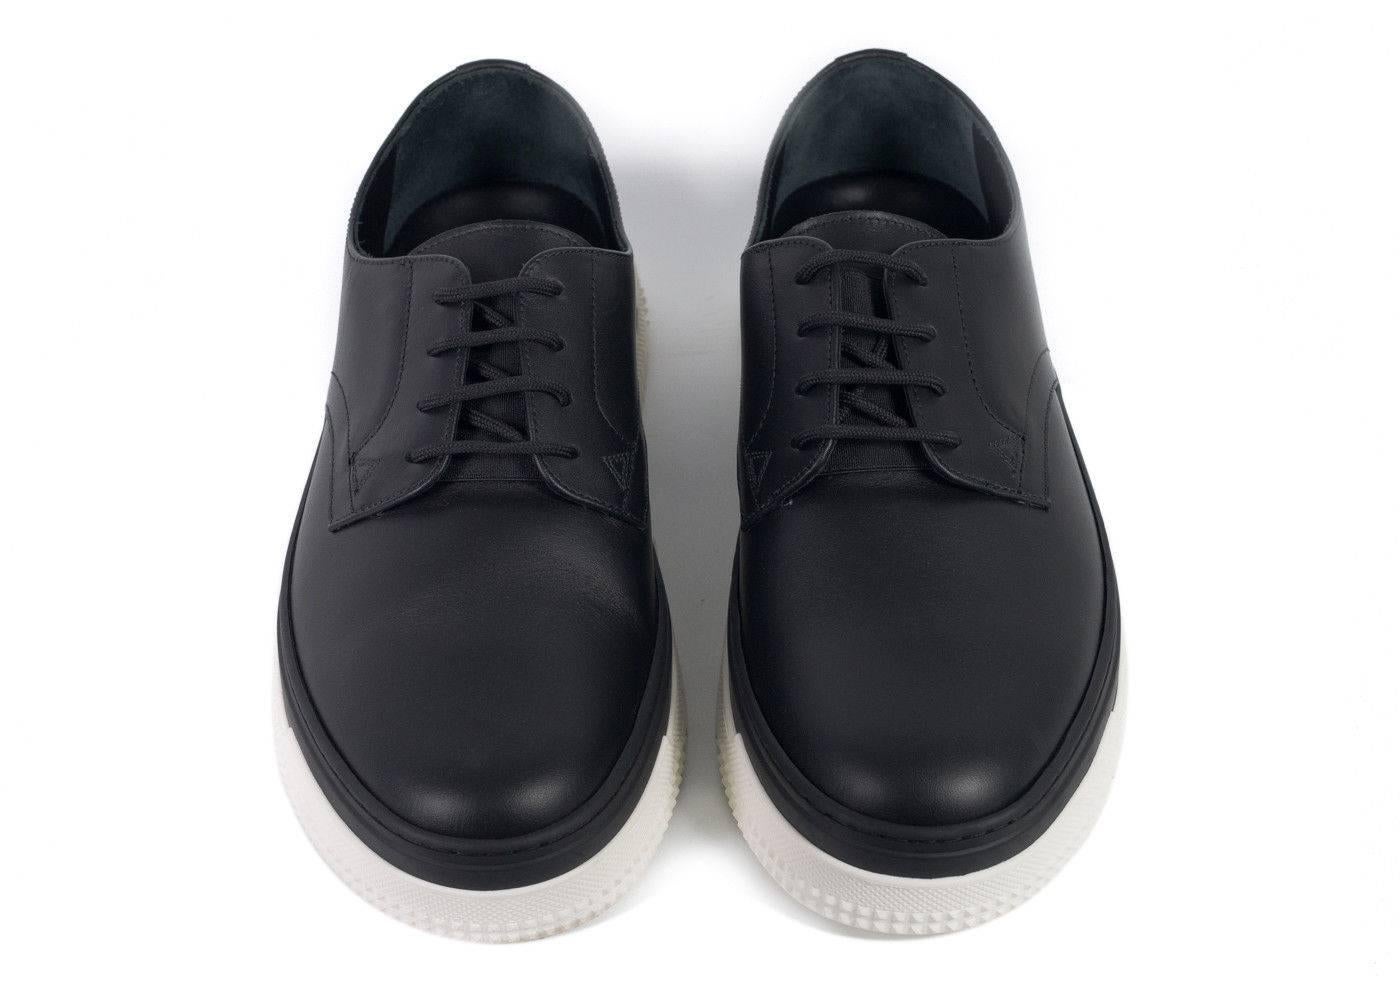 Brand New Valentino Sneakers
Original Box & Dust Bag Included
Retails in Stores & Online for $895
Size IT45 / US12 Fits True to Size

These black and white Valentino leather shoes are an elegant pair from the luxury label's feted